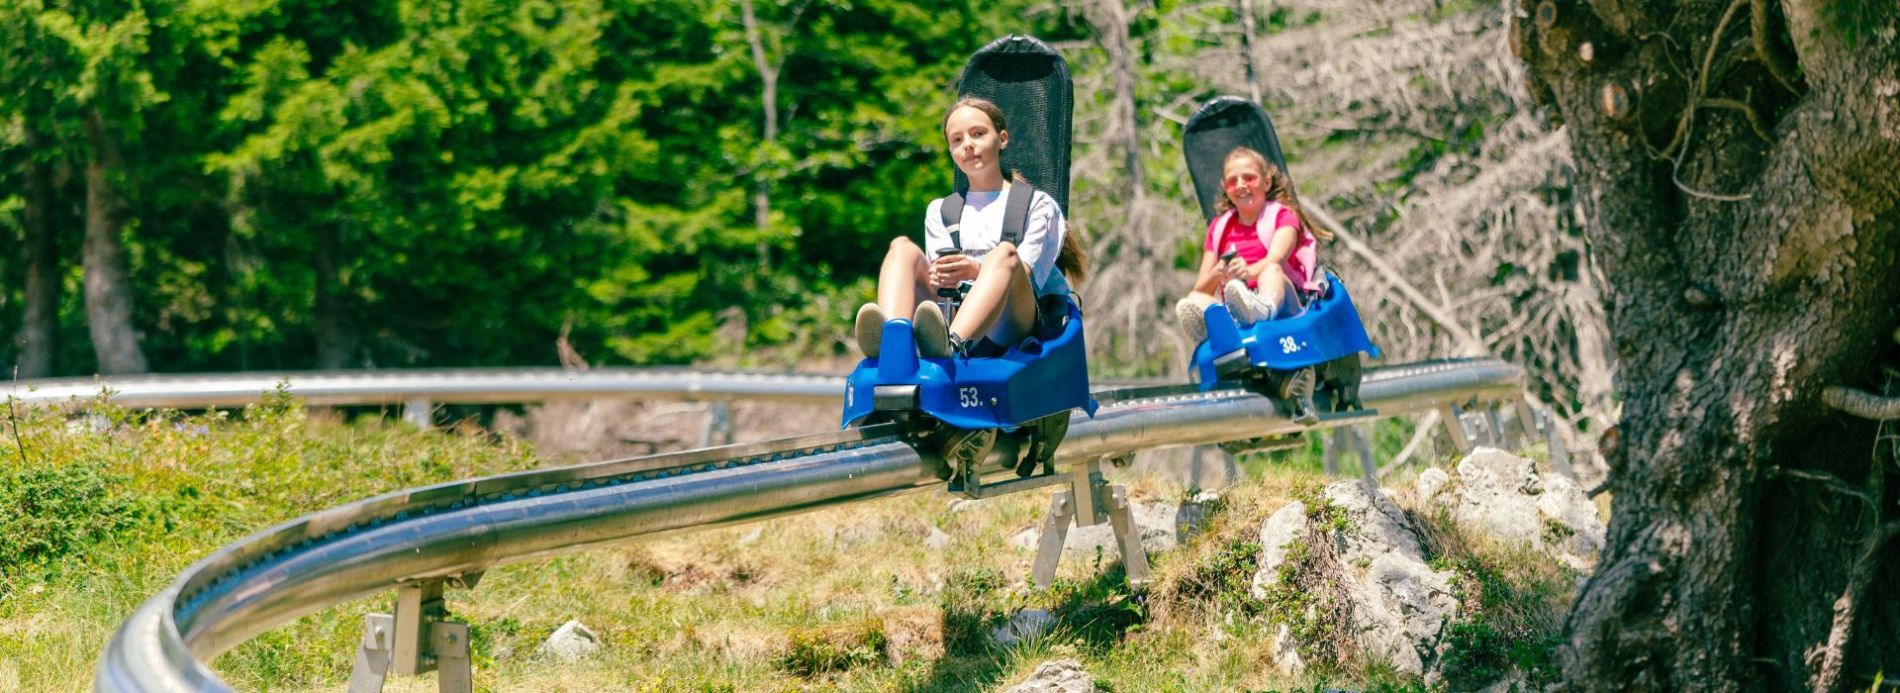 Young girls riding on mountain coaster